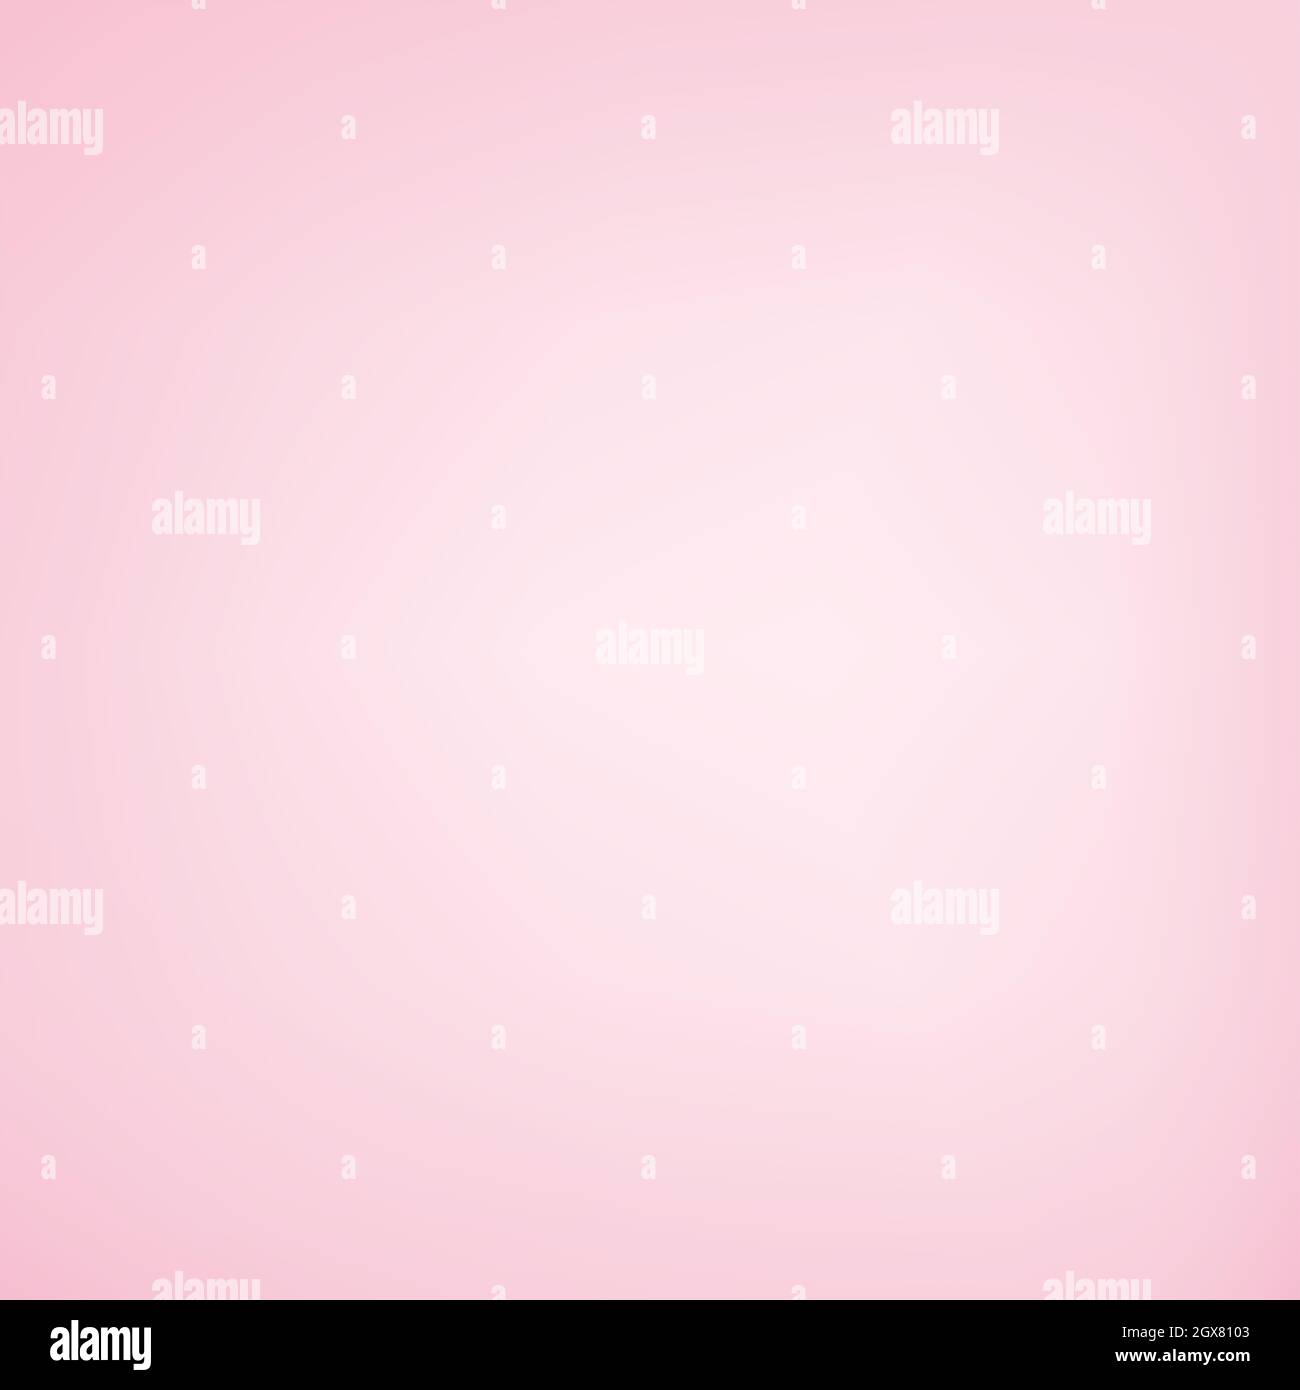 Light pink gradient background square proportion Stock Photo